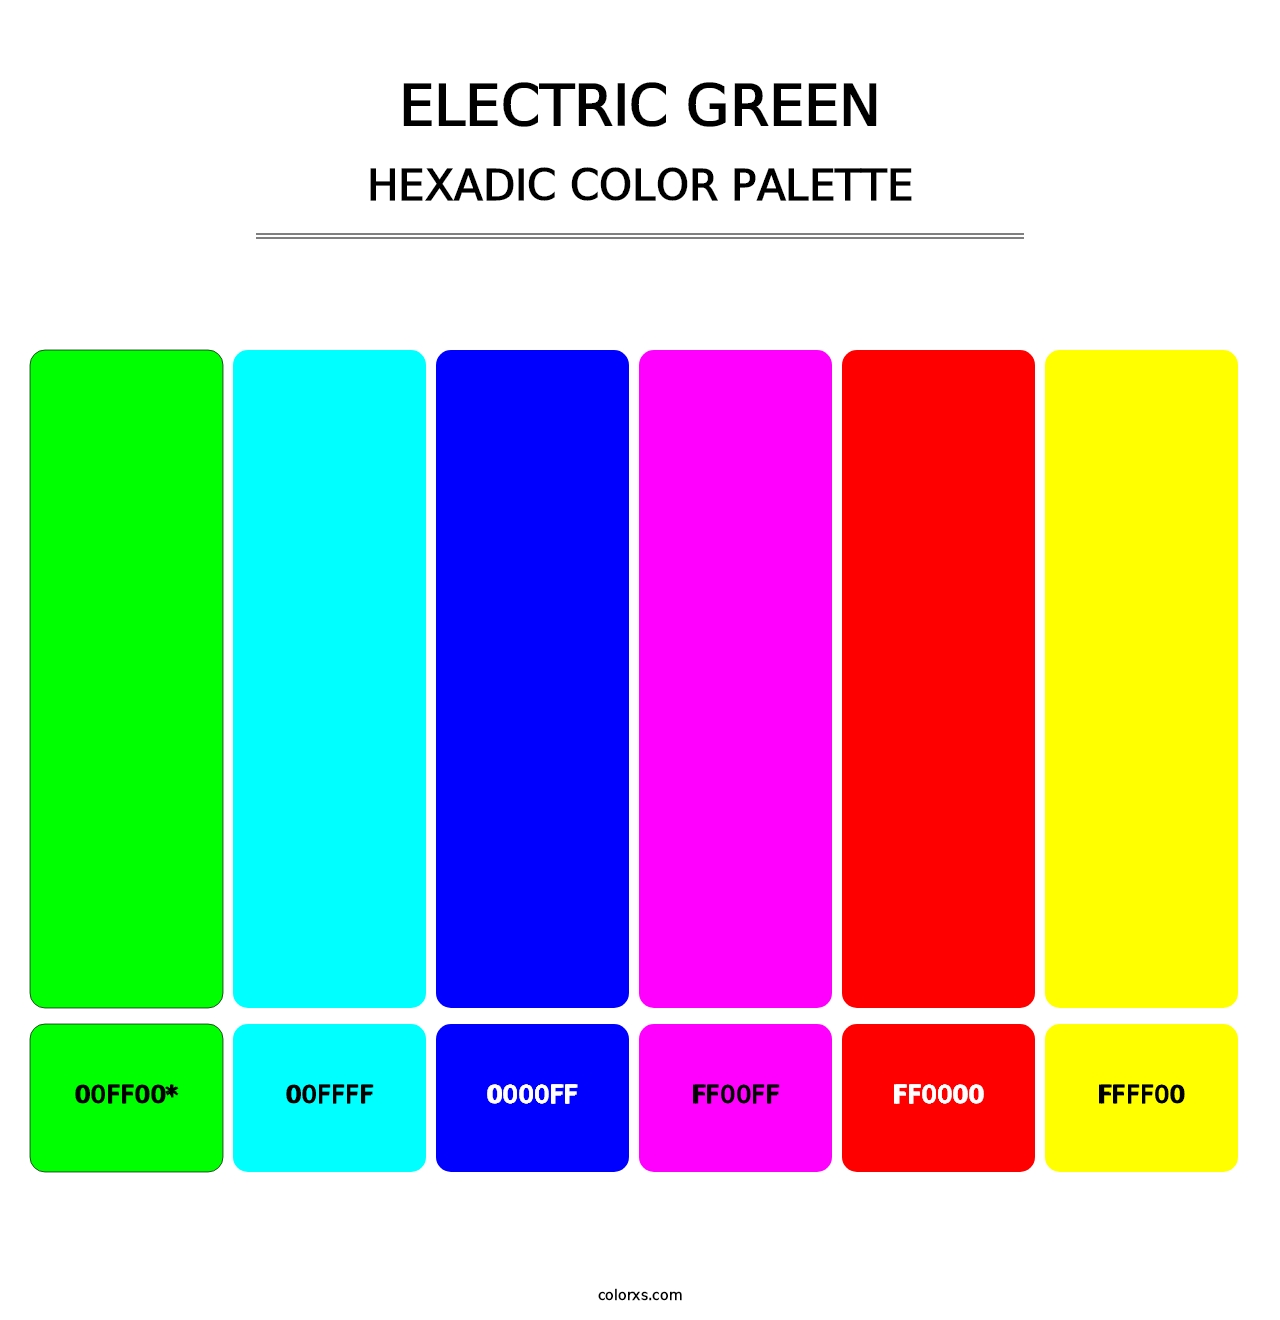 Electric Green - Hexadic Color Palette